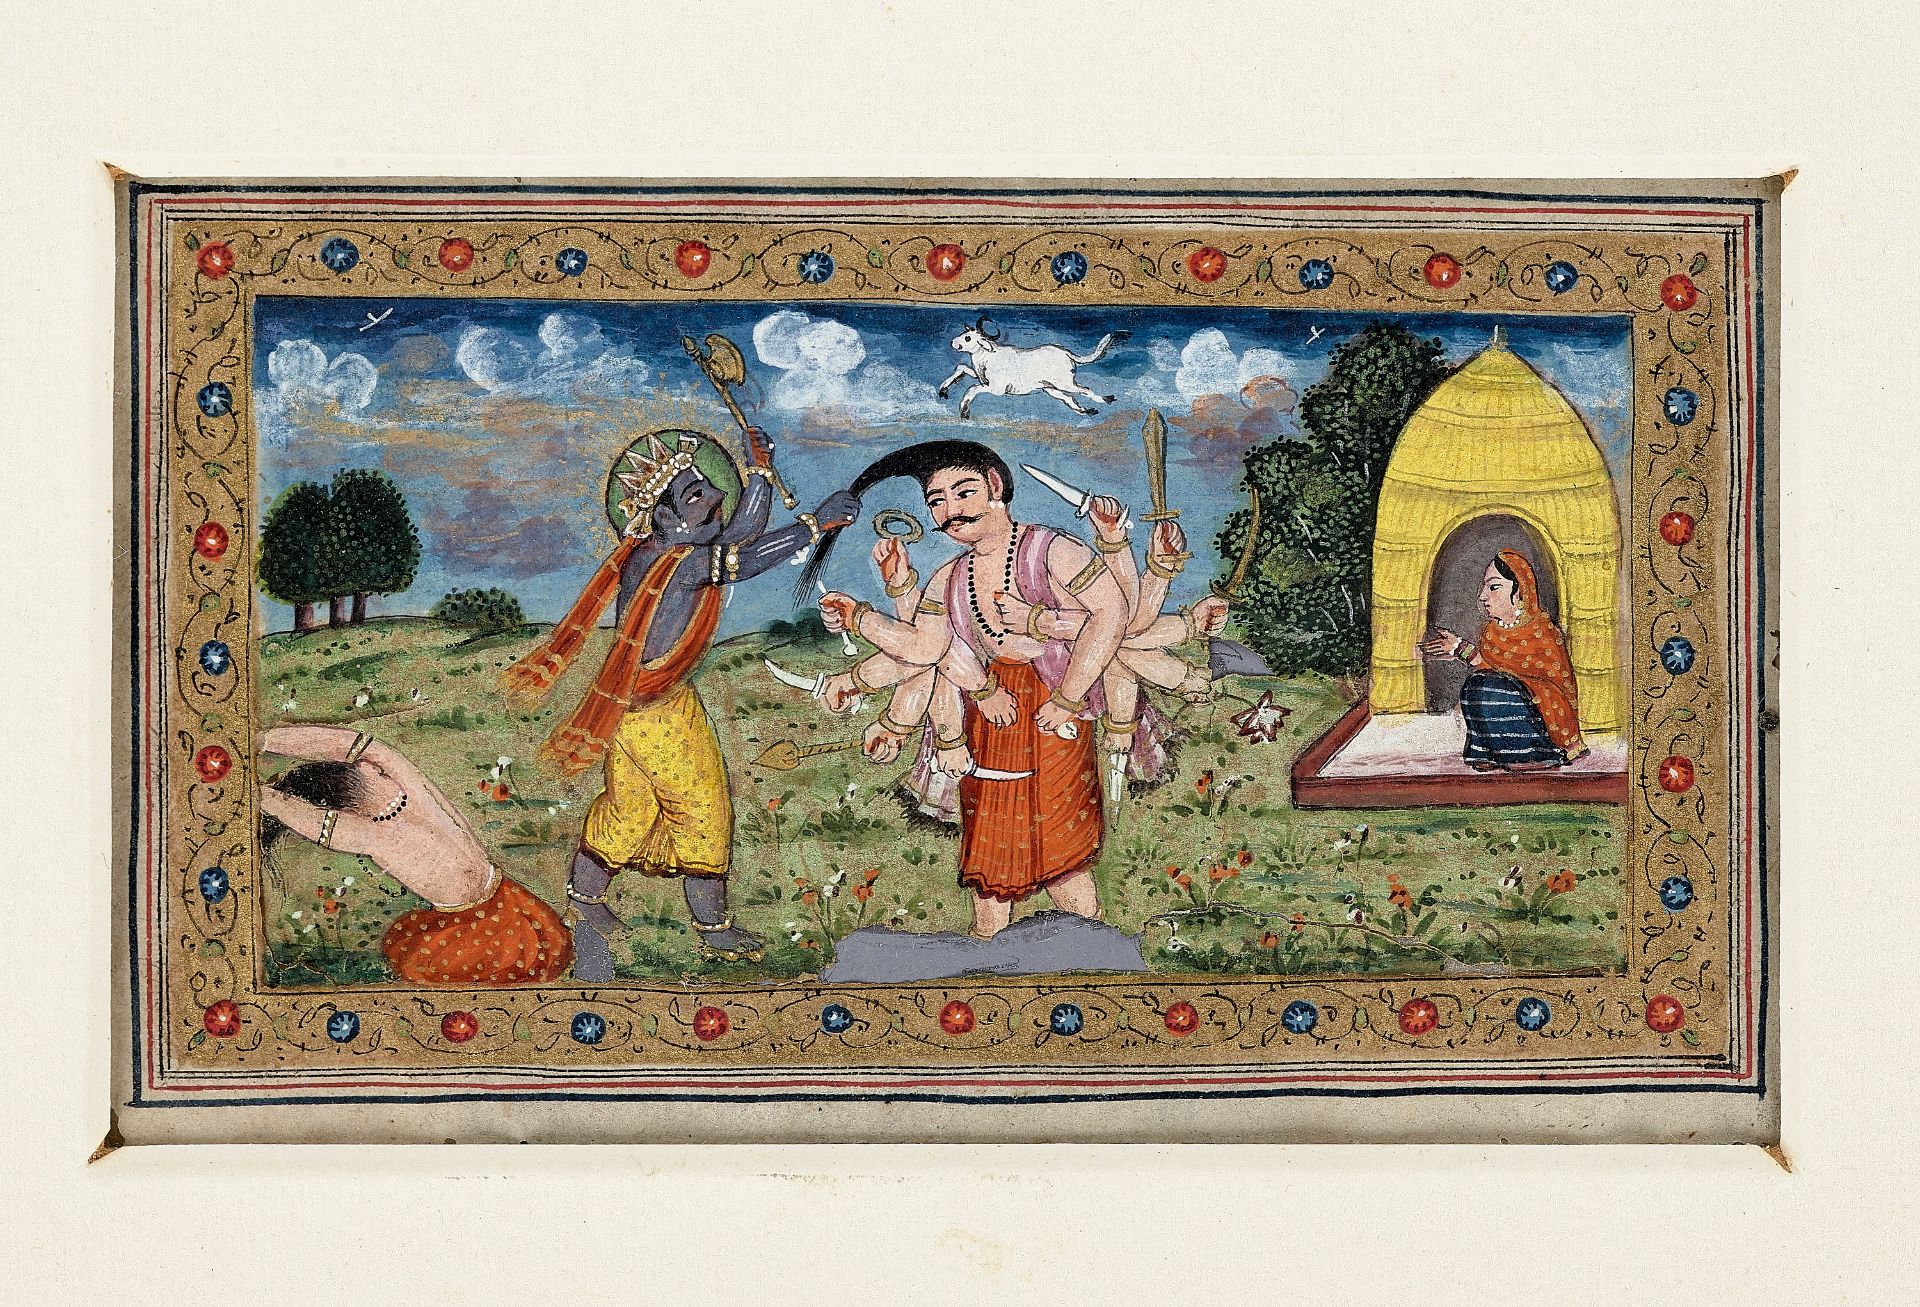 A RARE GROUP OF 27 FOLIOS FROM A MANUSCRIPT, KASHMIR 18TH CENTURY - Image 10 of 15